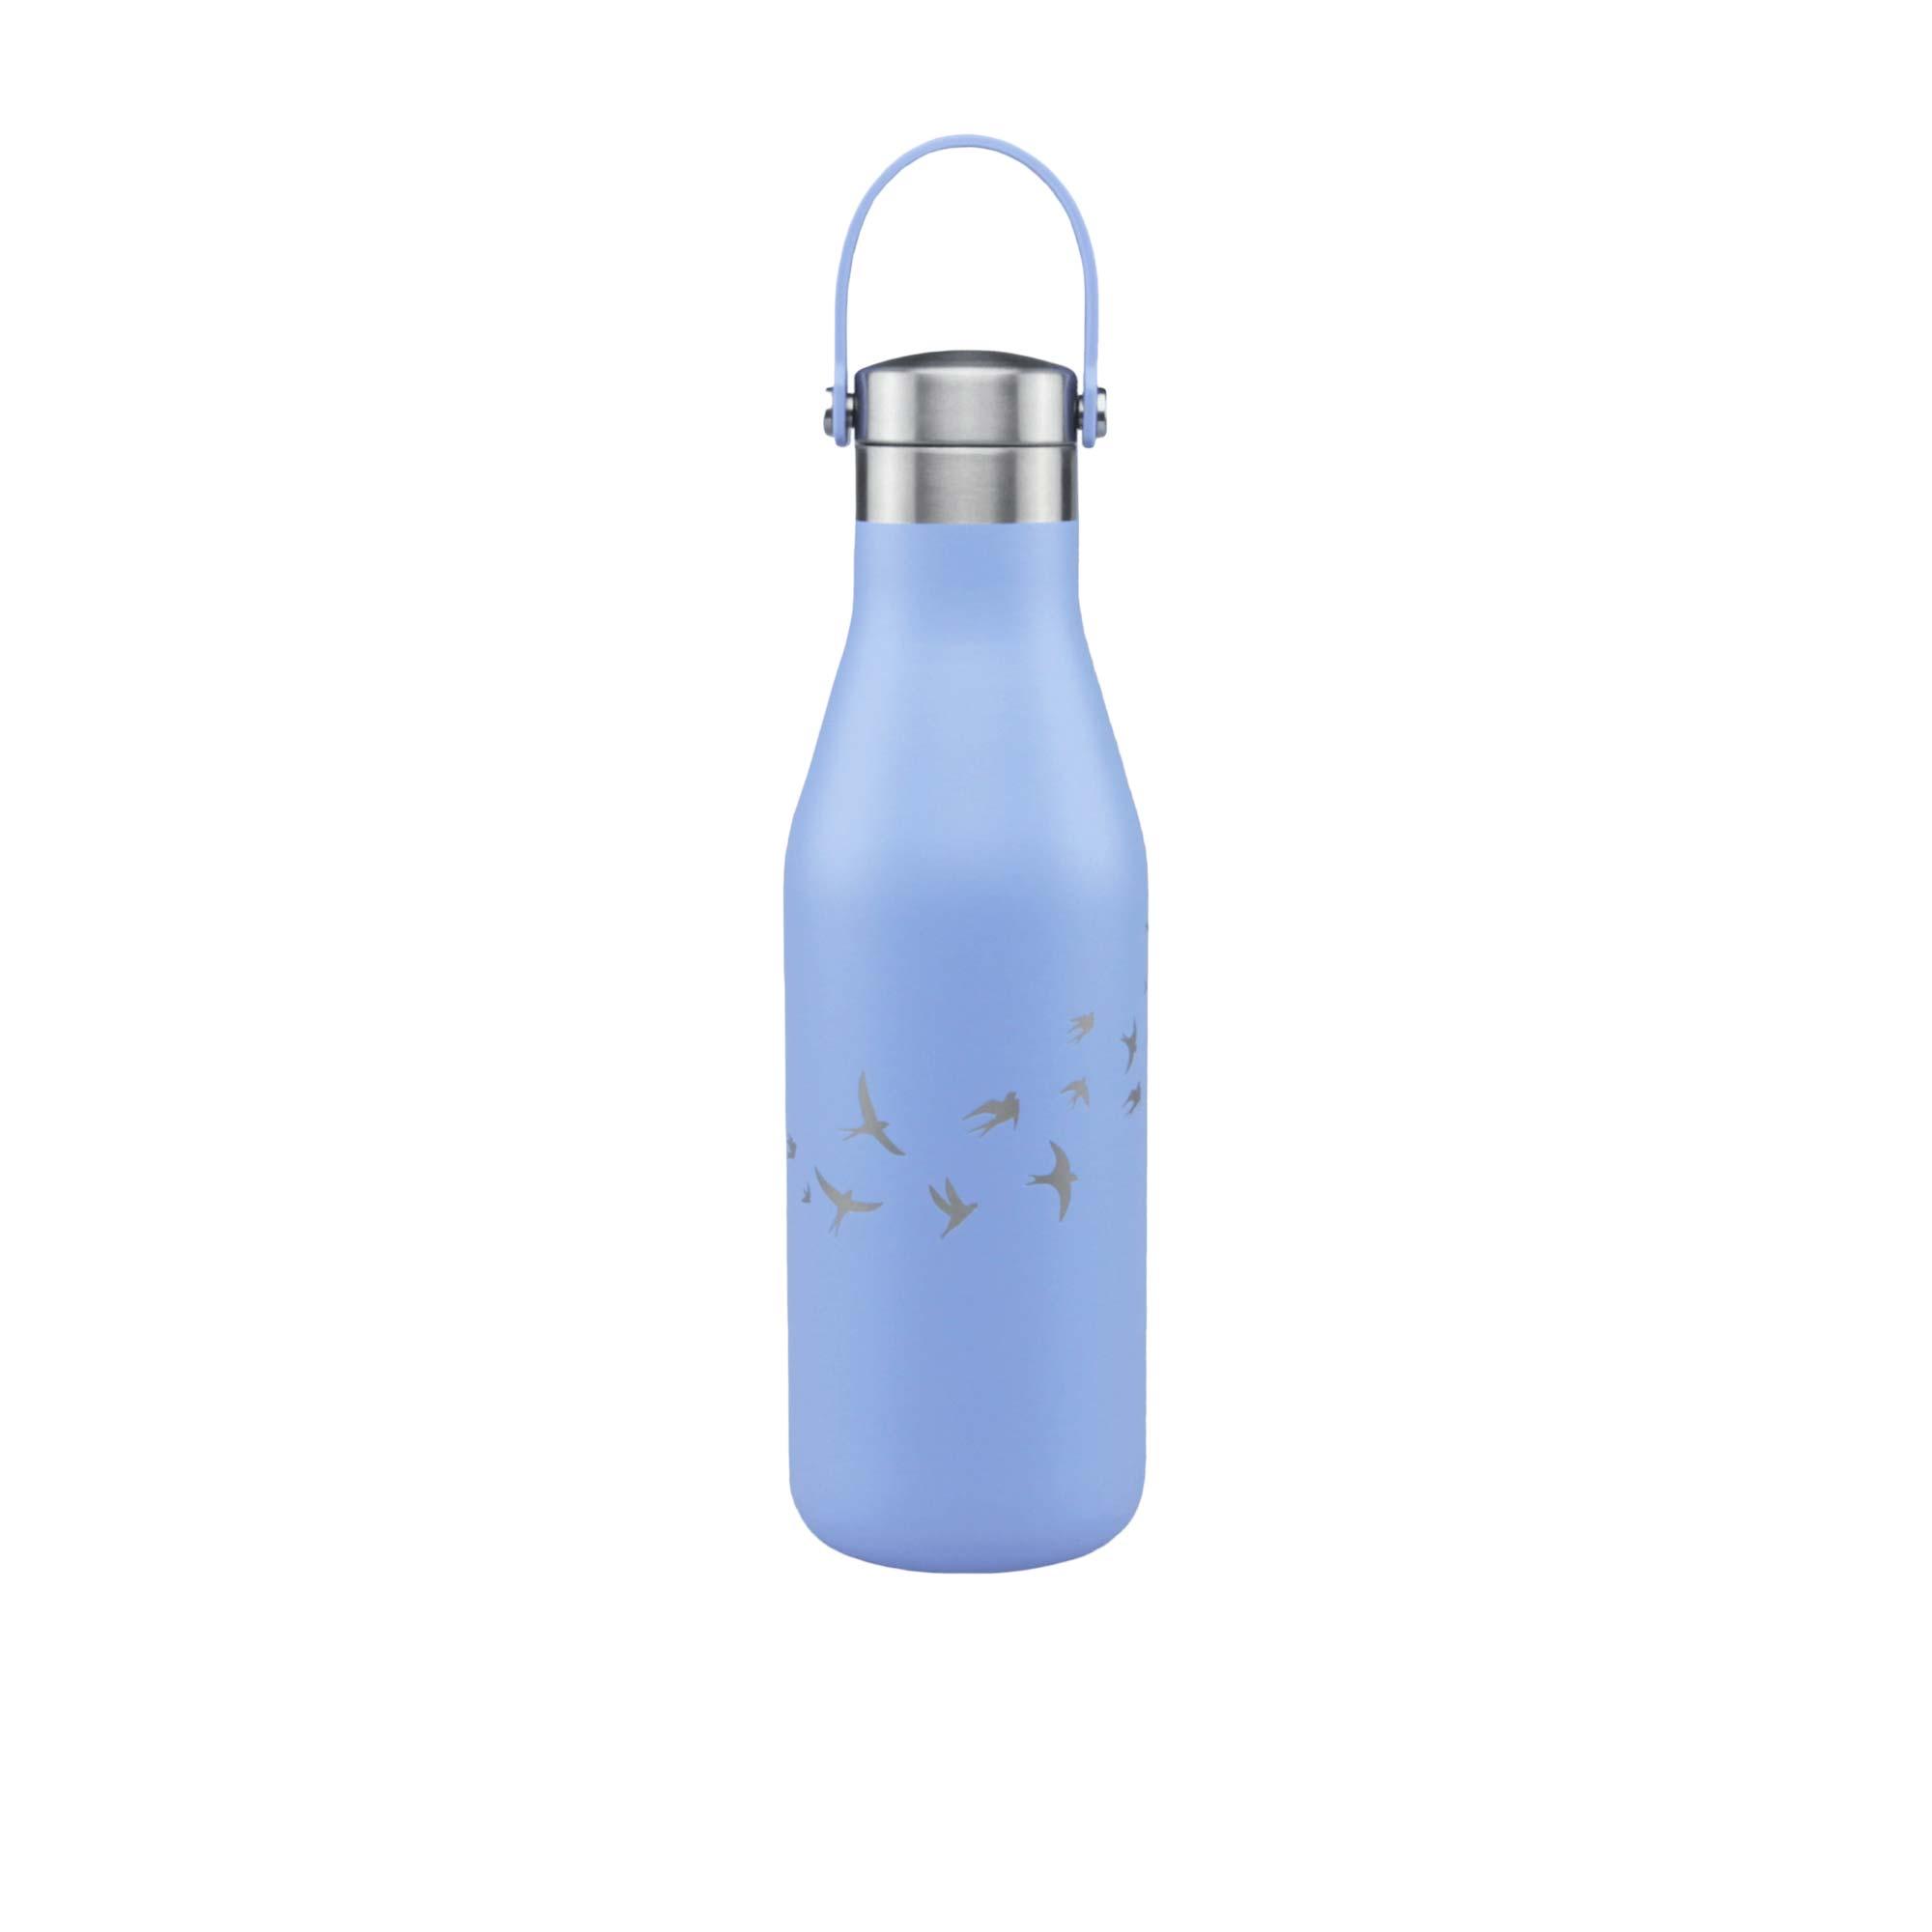 Ohelo Insulated Drink Bottle 500ml Blue Image 3